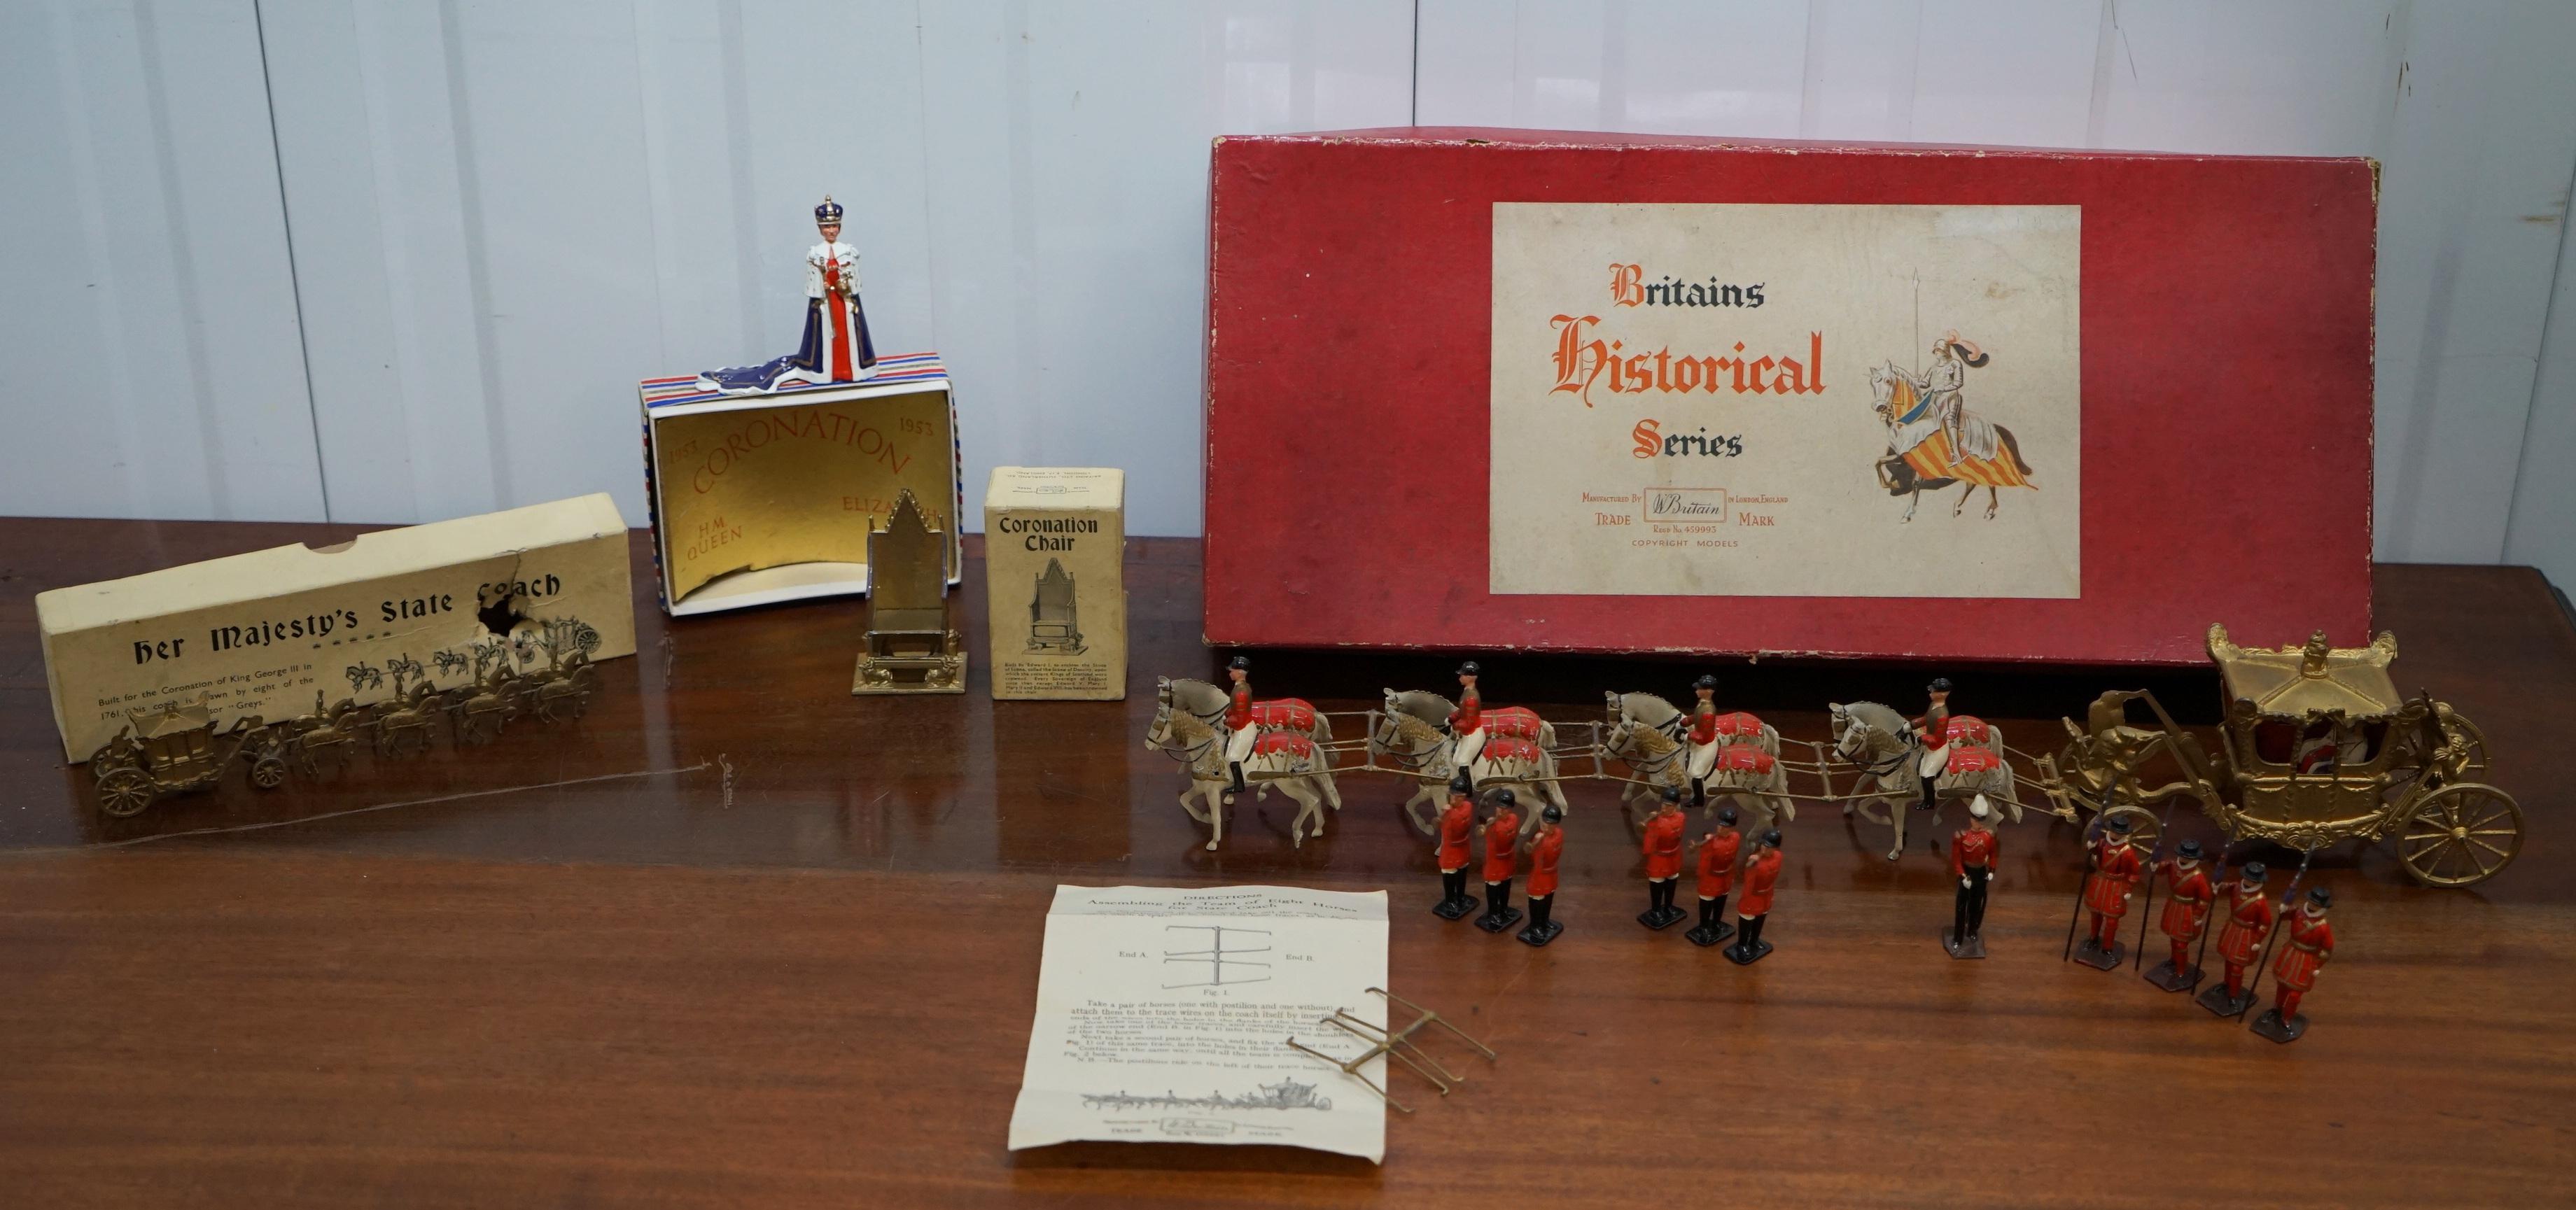 We are delighted to offer for sale this lovely rare boxed original souvenir of HM The Queen Elizabeth II on her coronation in 1953

This is part of a larger set of vintage royal exhibition toys that I have

The toy or model is in the original